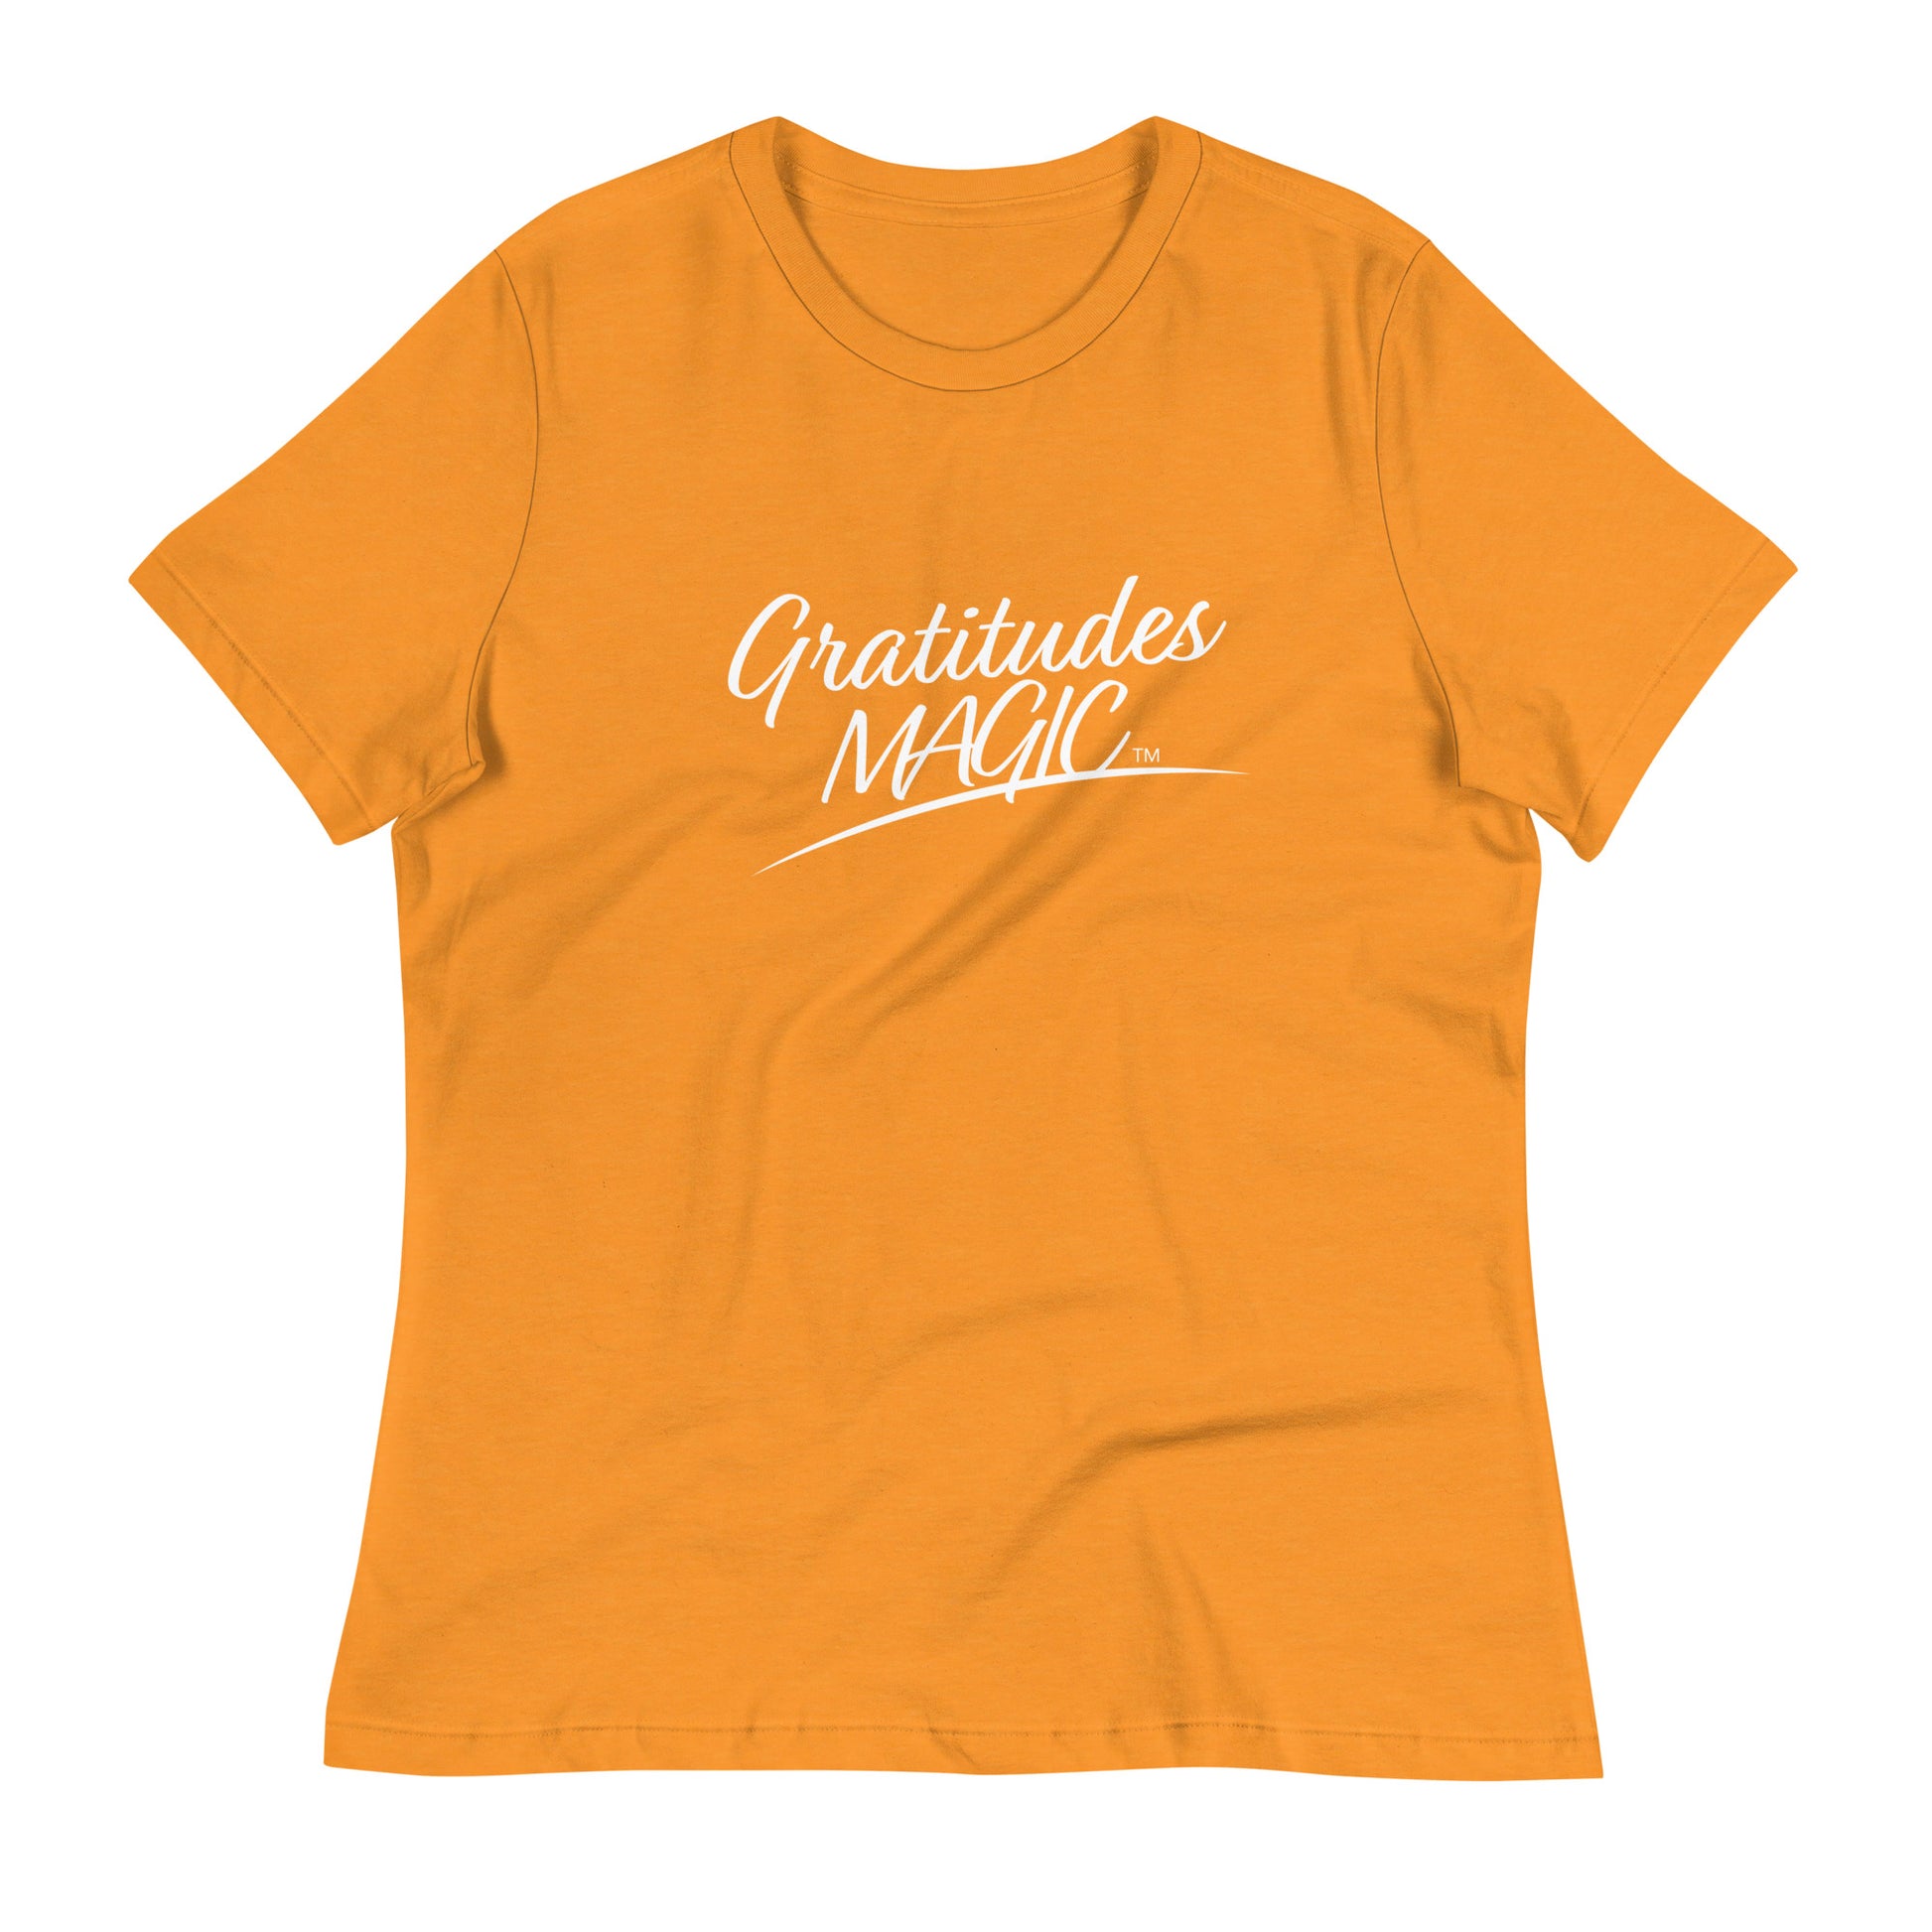 Affordable women's tees- Heather Marmalade